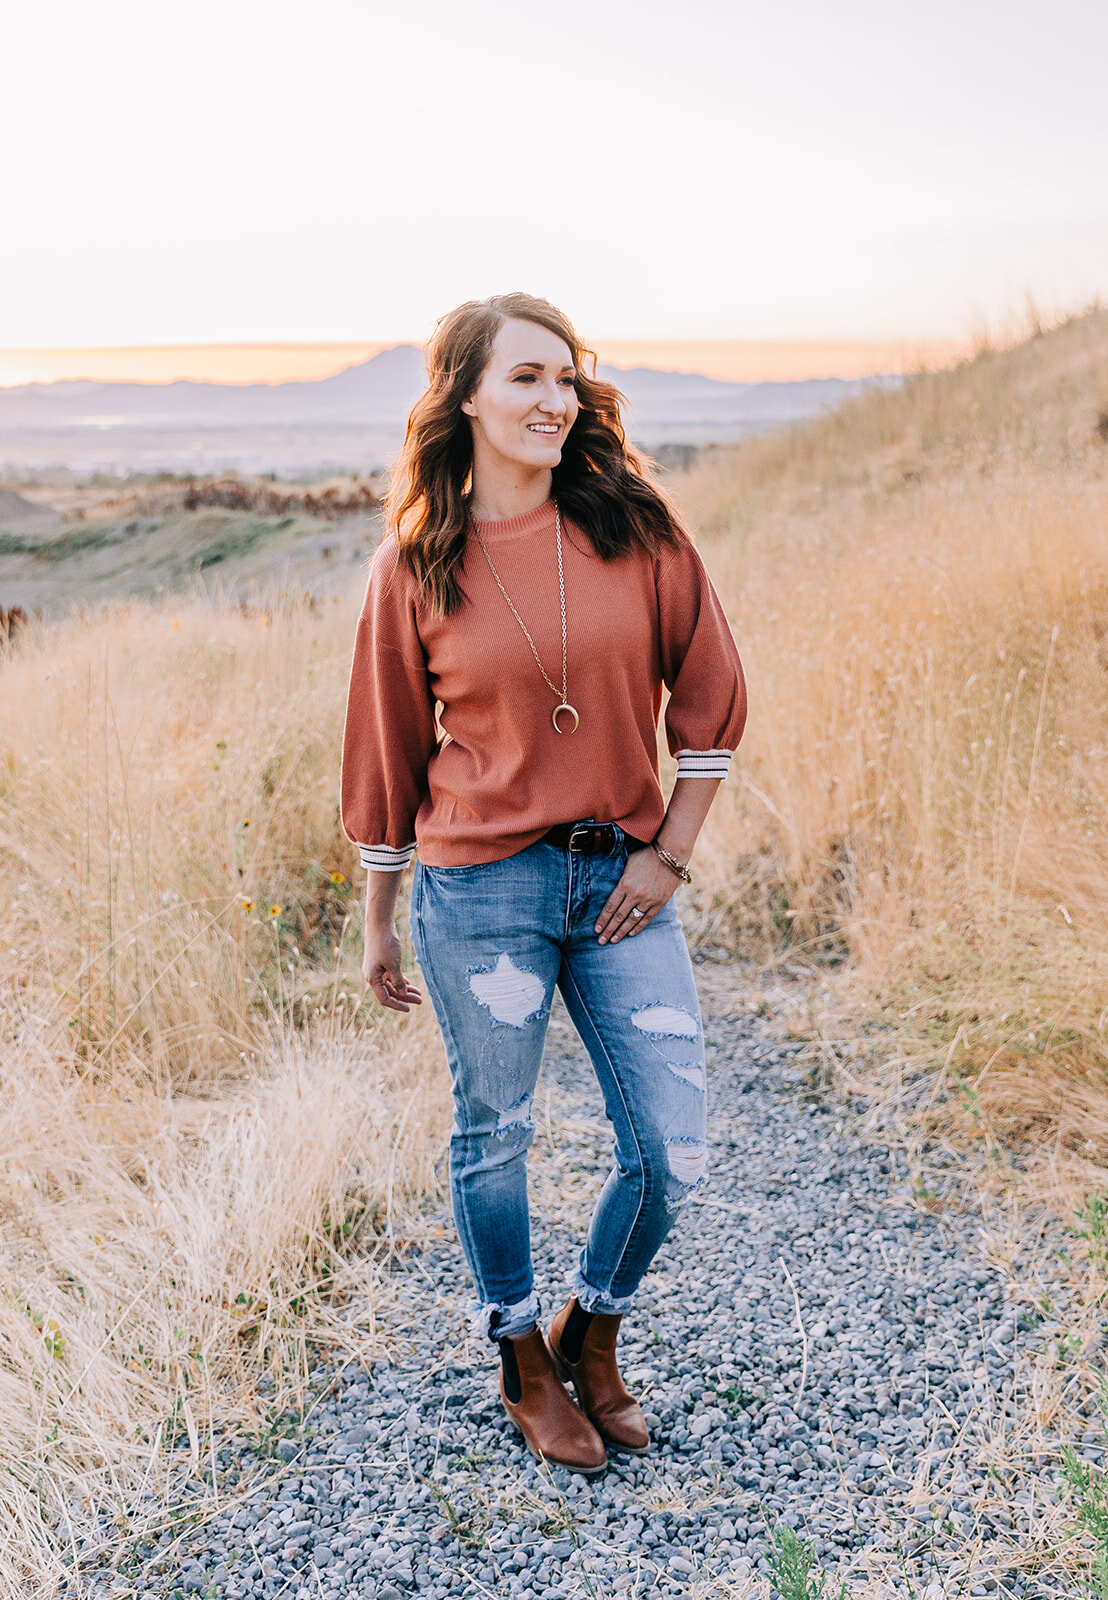  women’s clothing boutique tremonton utah storefront fashion photography bella alder professional commerical photos for online clothing boutique the classic shop rust red top with distressed jeans classy casual outfit go-to fashion style brunette mod